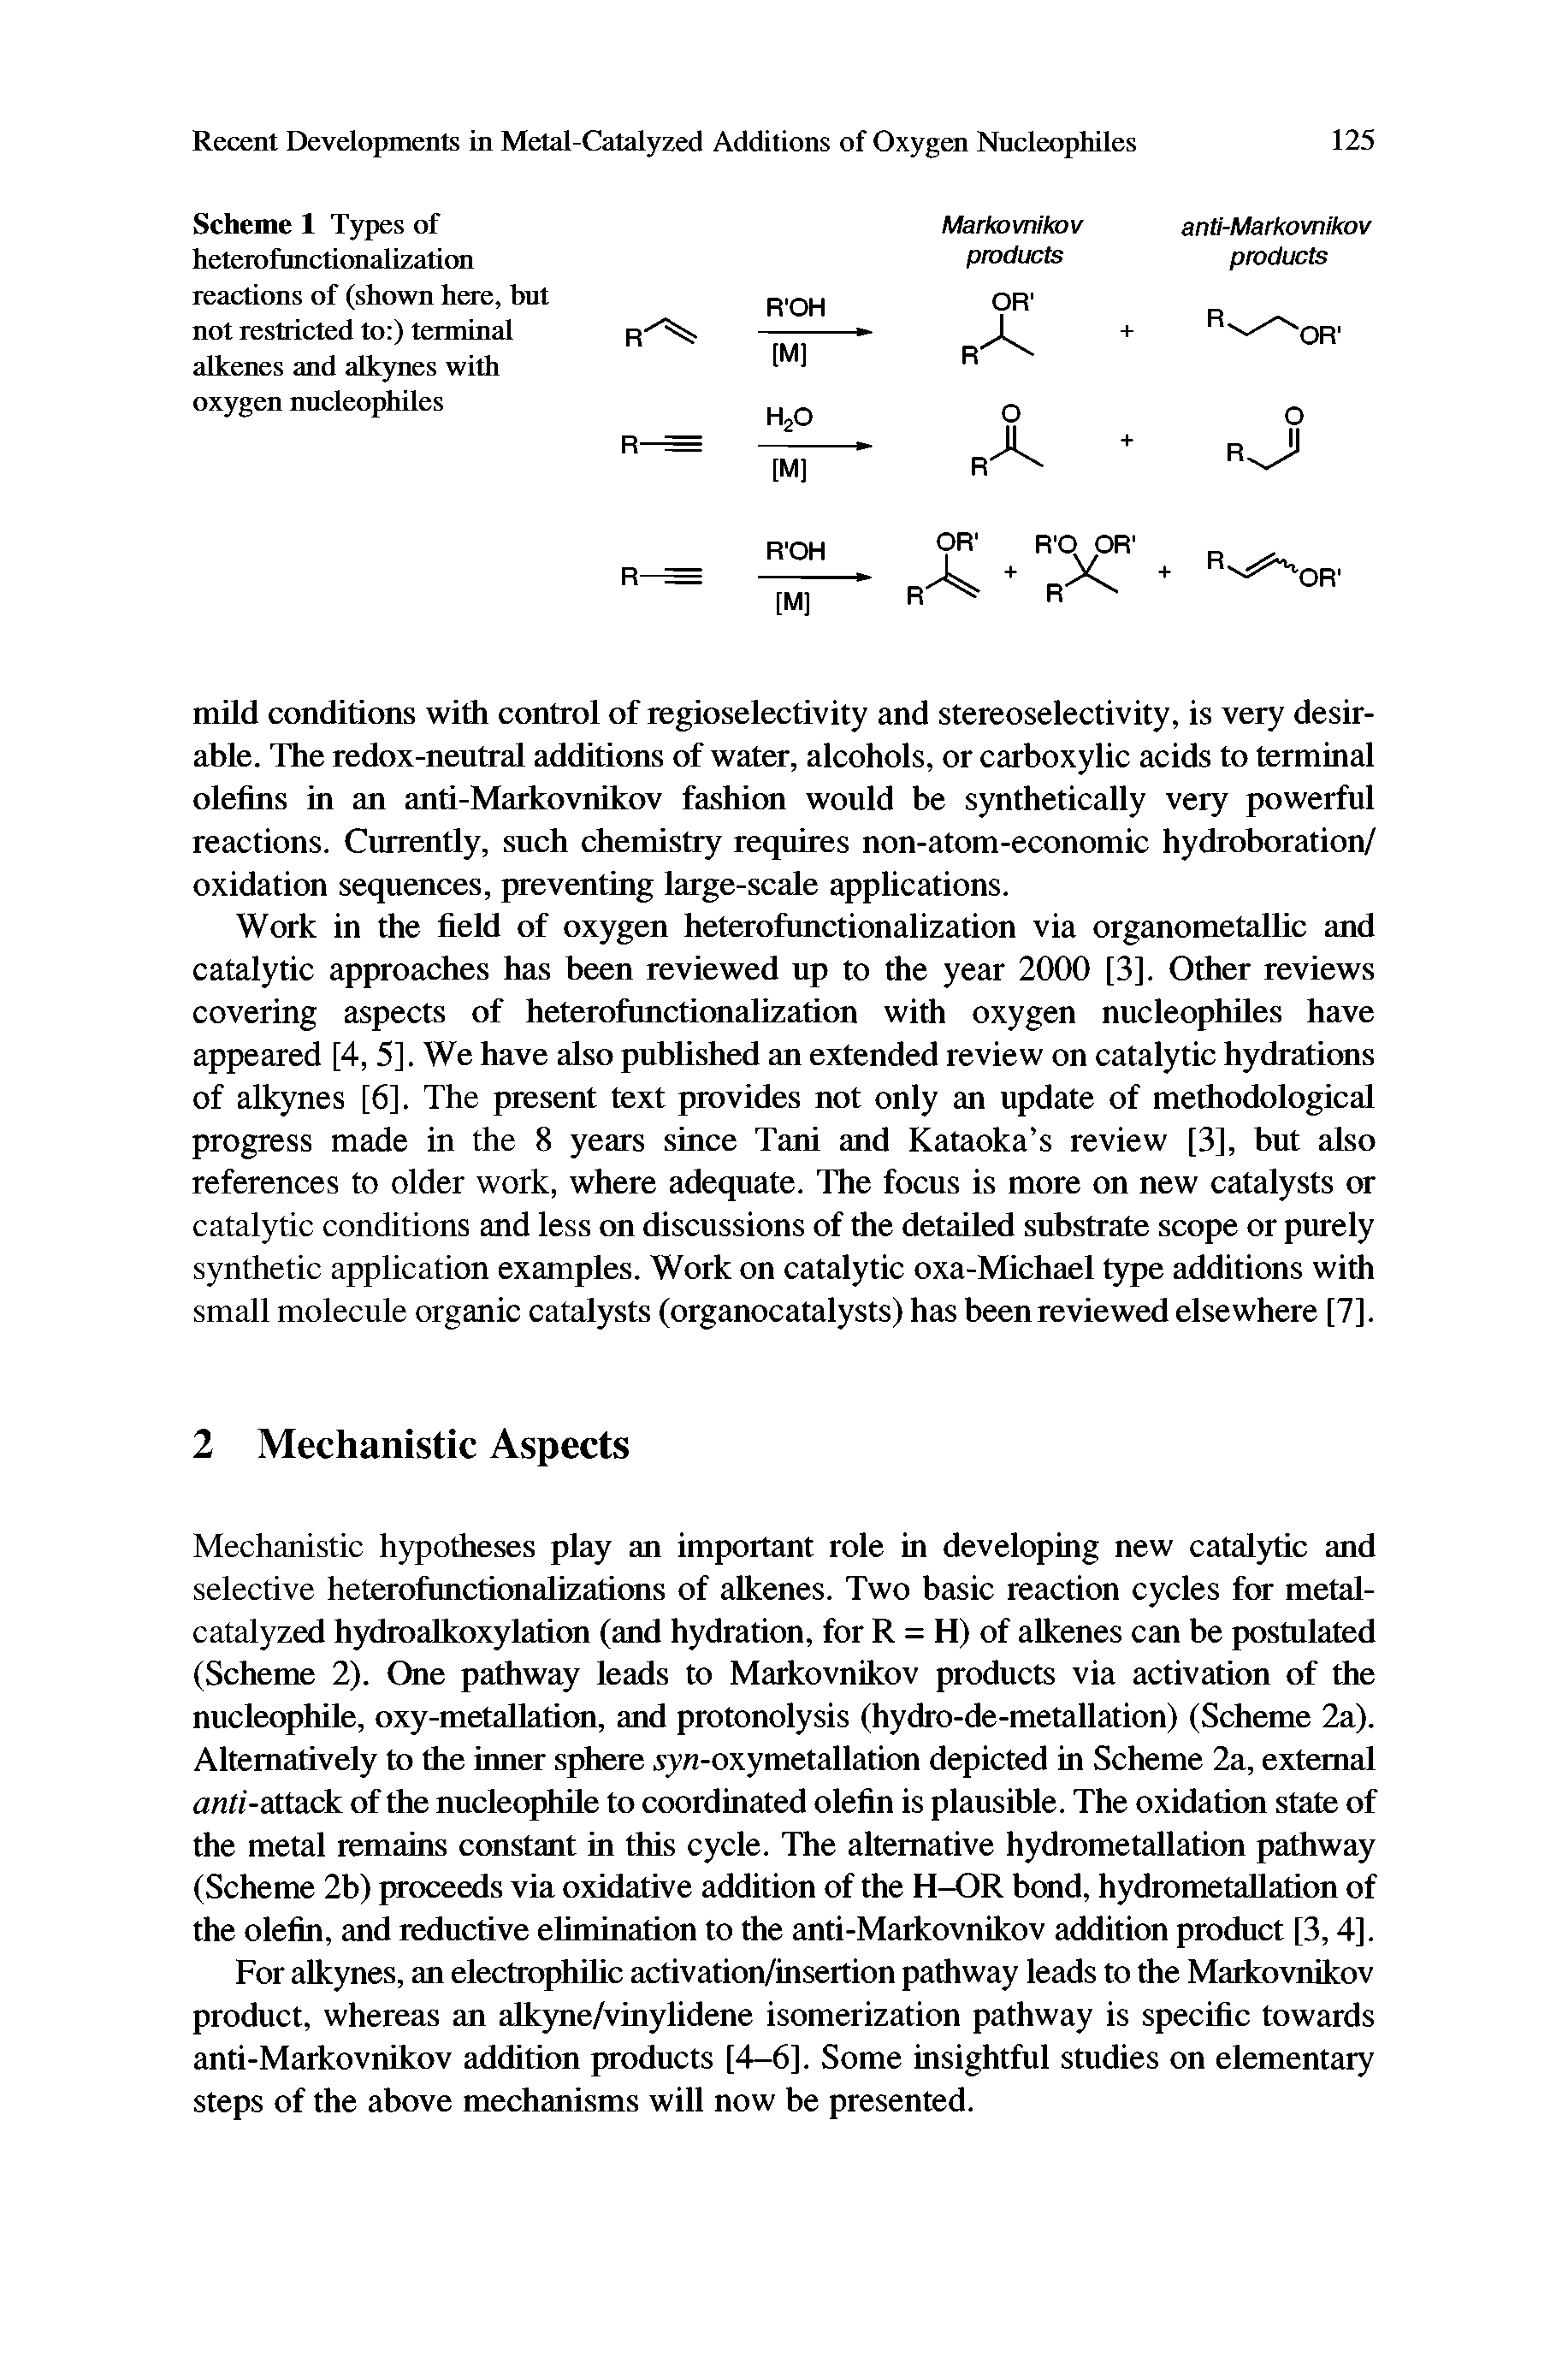 Scheme 1 Types of heterofunctionalization reactions of (shown here, but not restricted to ) terminal aUcenes and alkynes with oxygen nucleophiles...